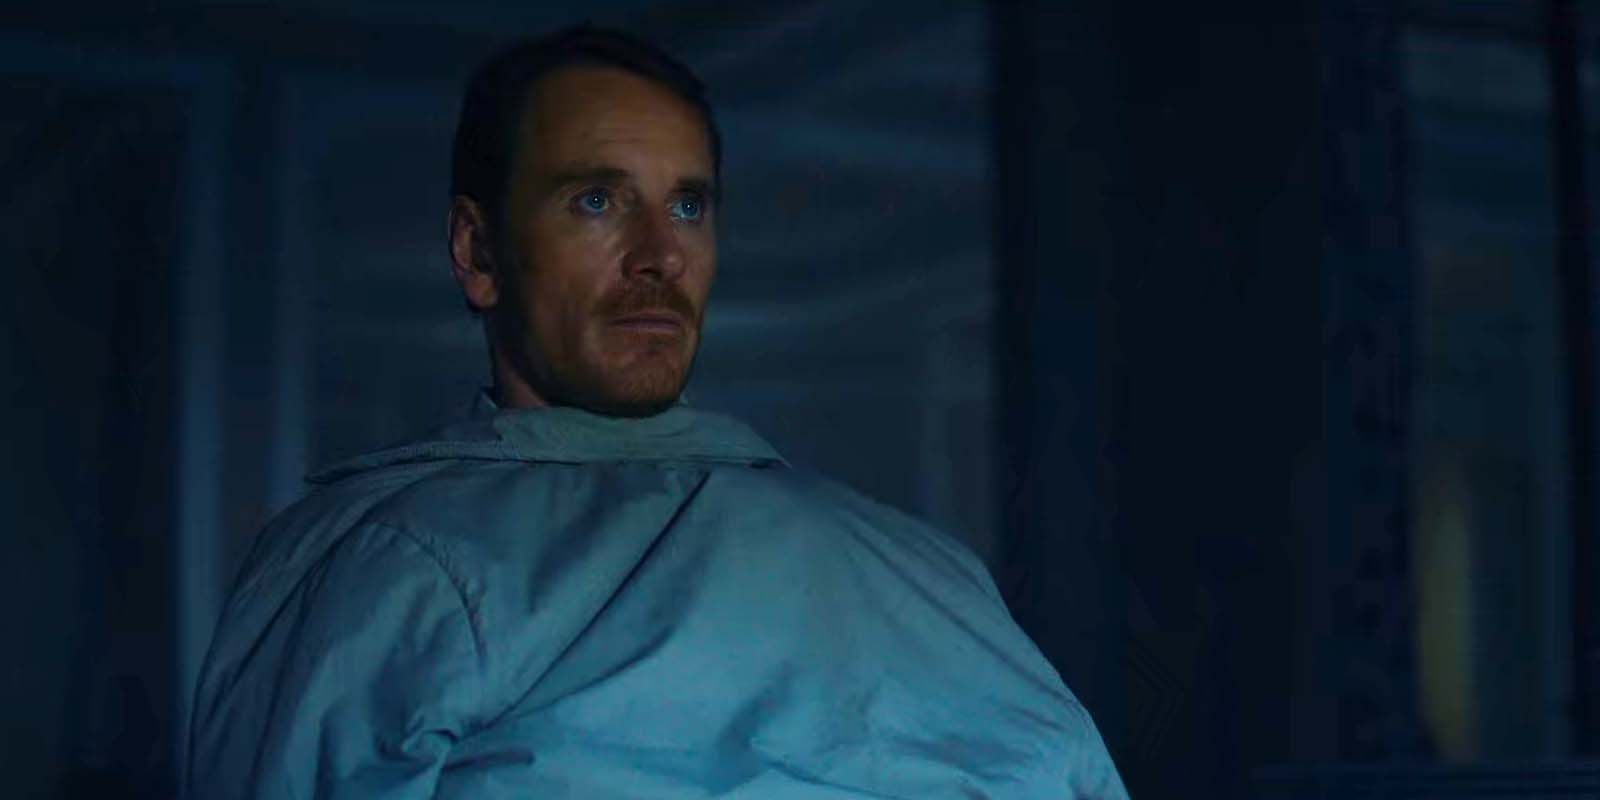 Michael Fassbender using his jacket as a blanket as the killer in The Killer